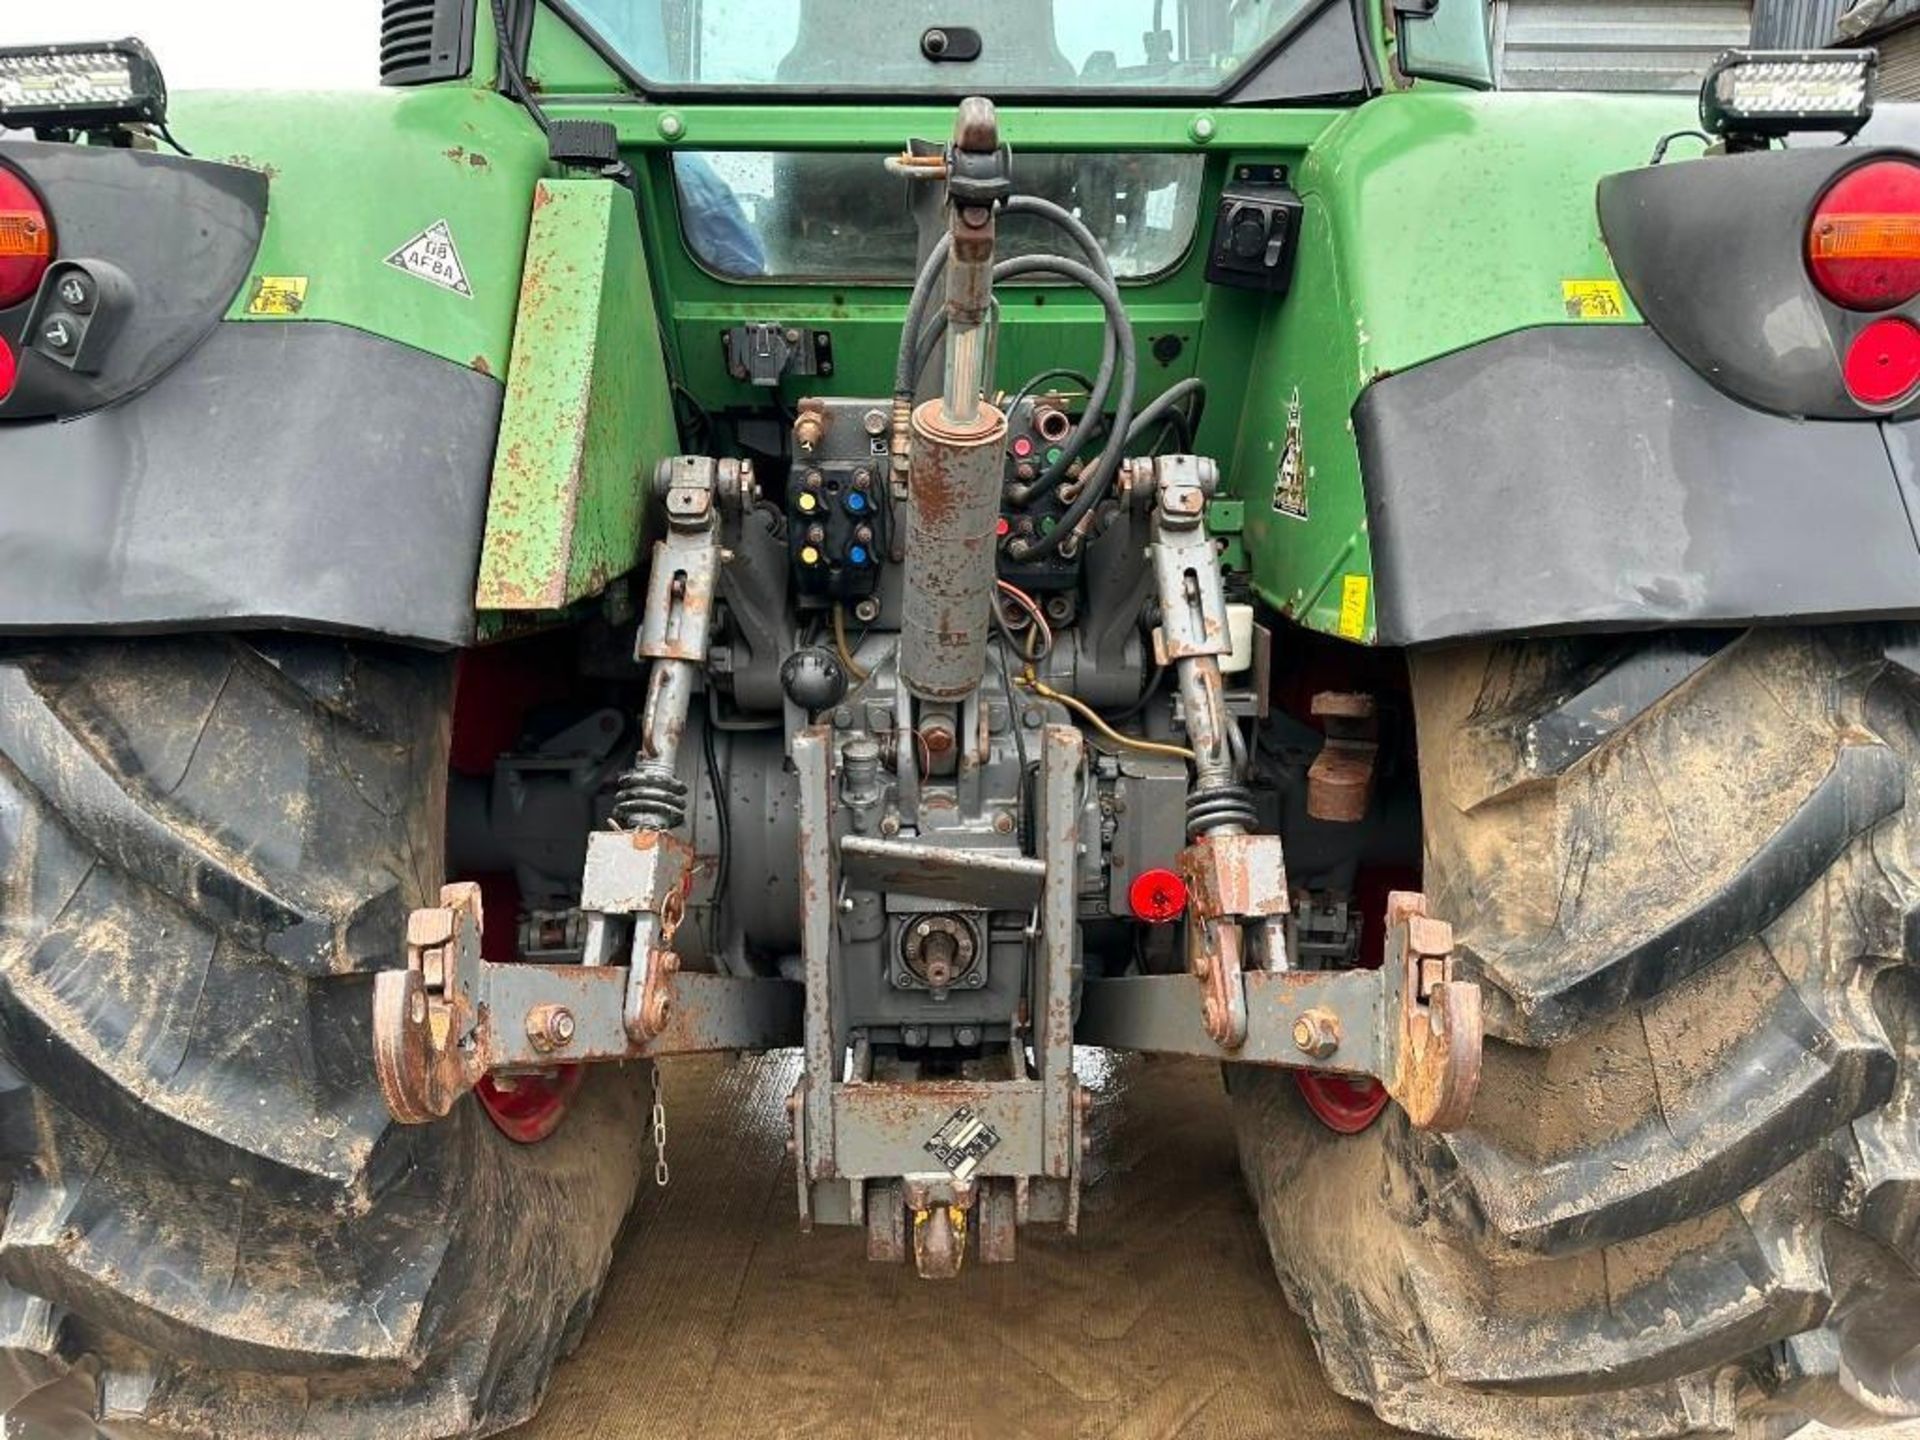 2010 Fendt 820 Vario TMS tractor, 4wd, front linkage, 4No spool valves, Bill Bennett pick up hitch. - Image 9 of 21